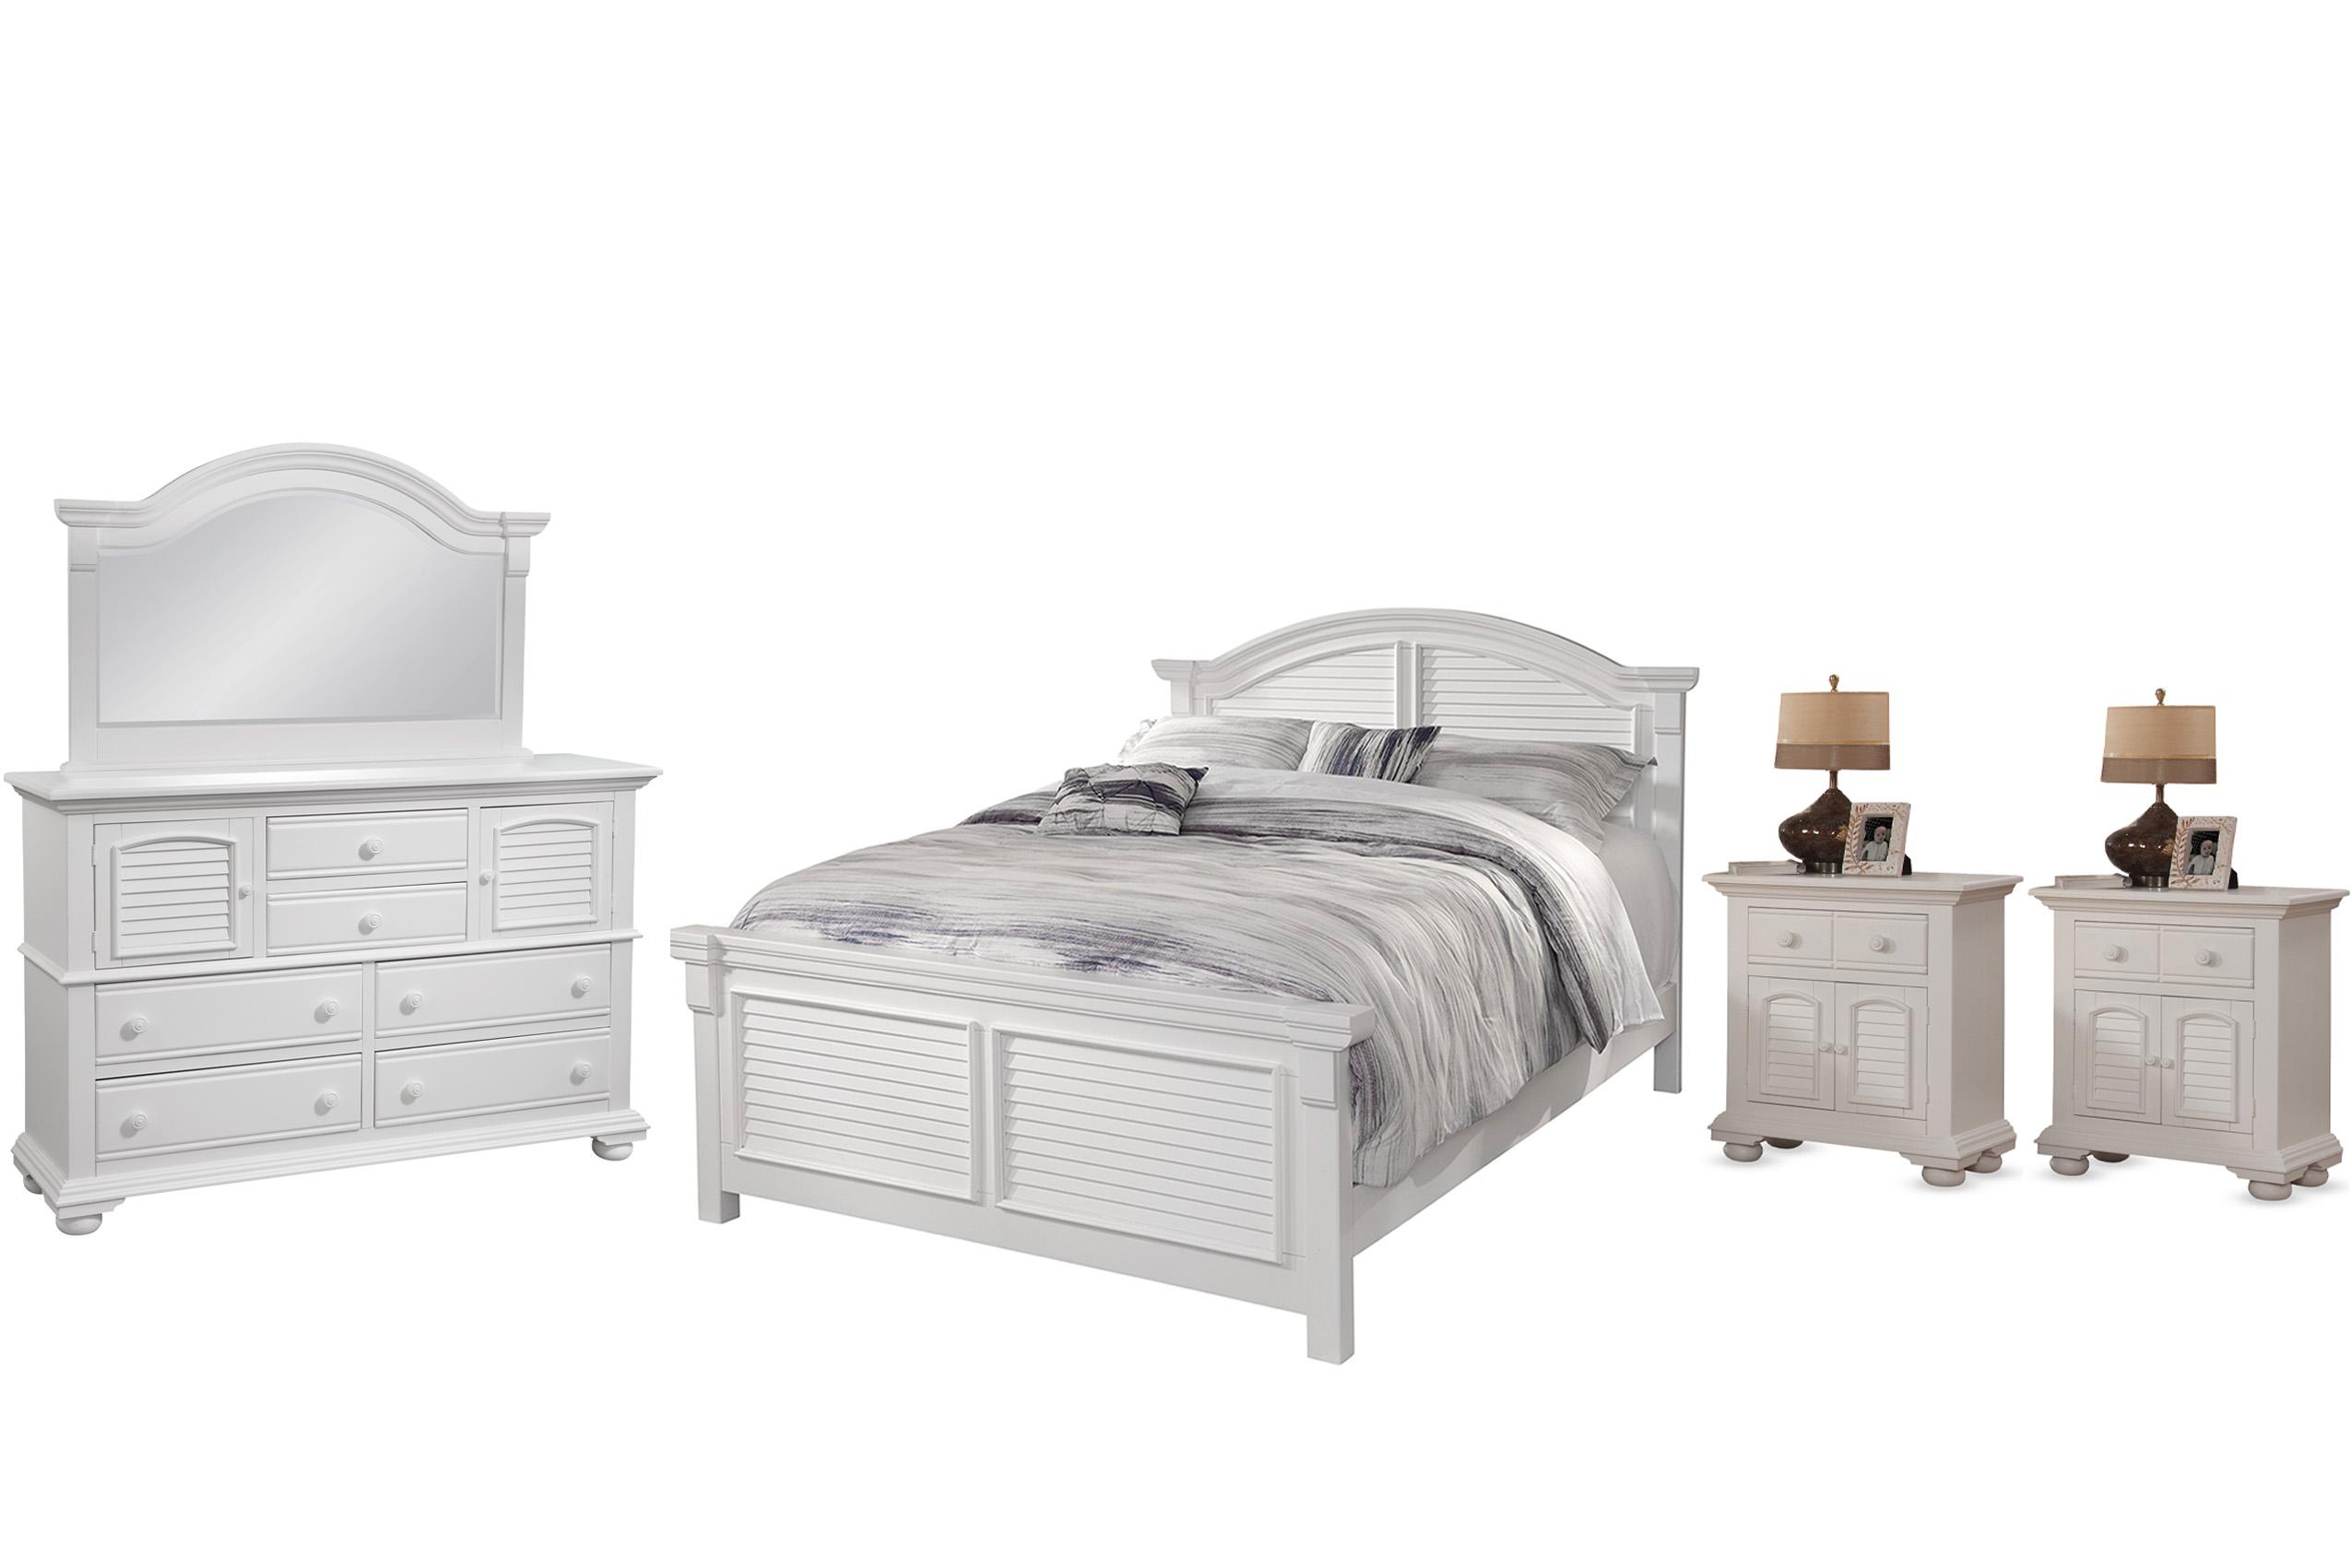 Classic, Traditional, Cottage Panel Bedroom Set COTTAGE 6510-50PAN 6510-50PAN 6510-412-2NDM-5PC in White 